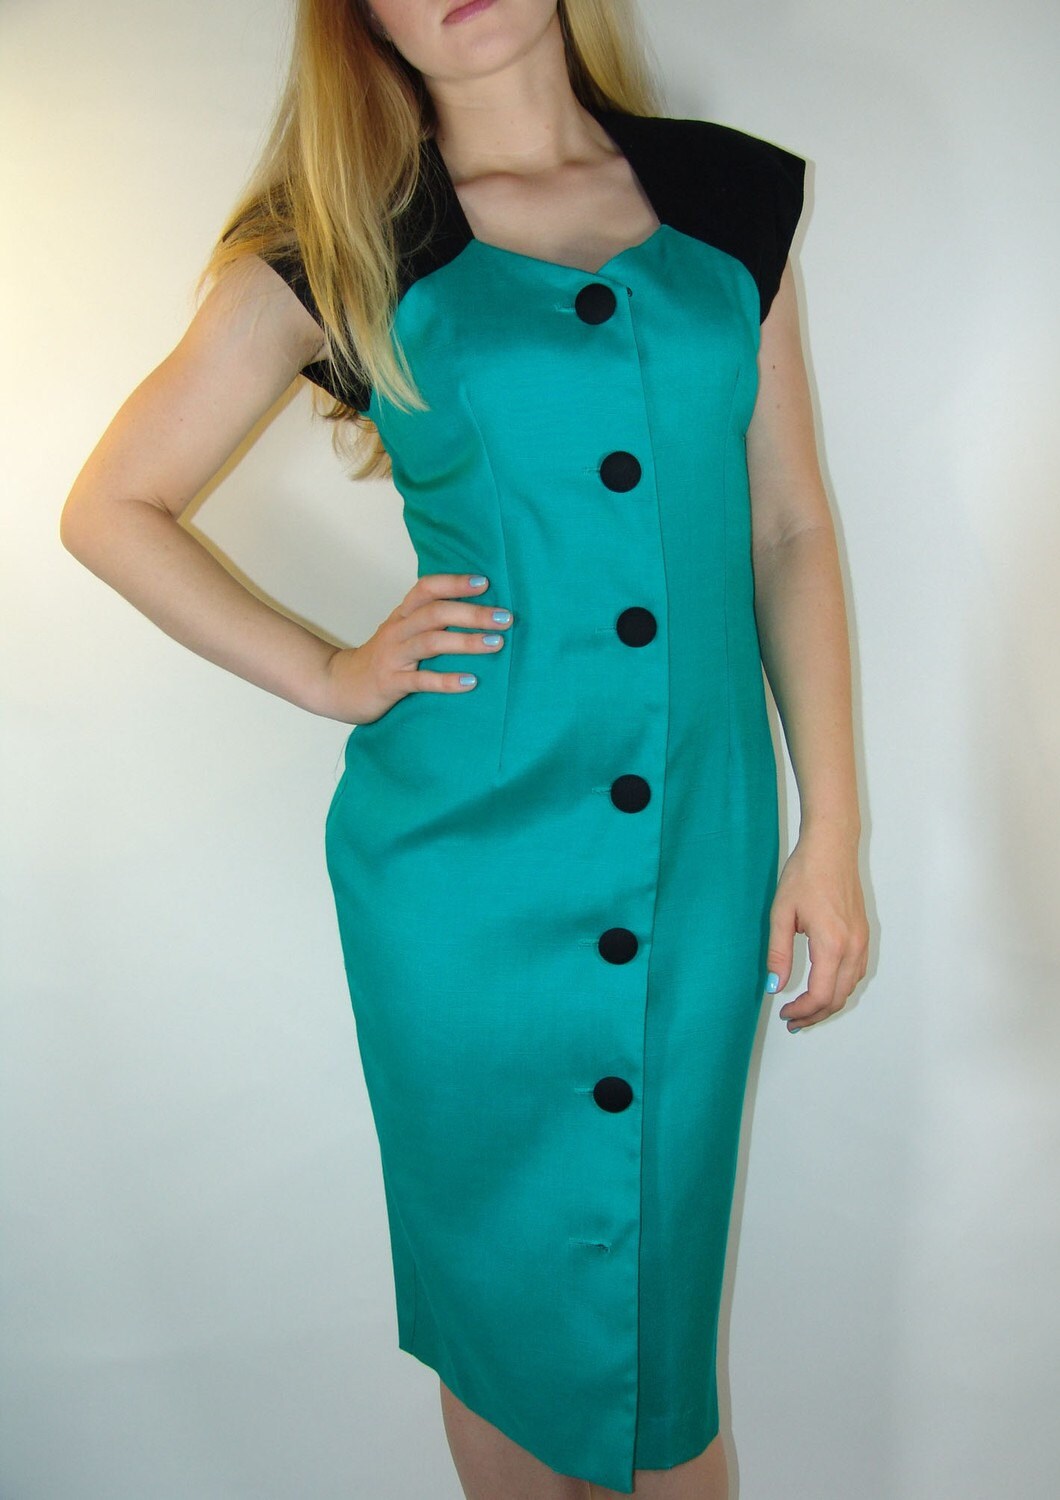 Vintage Green and Black Button Front Dress NEVER WORN